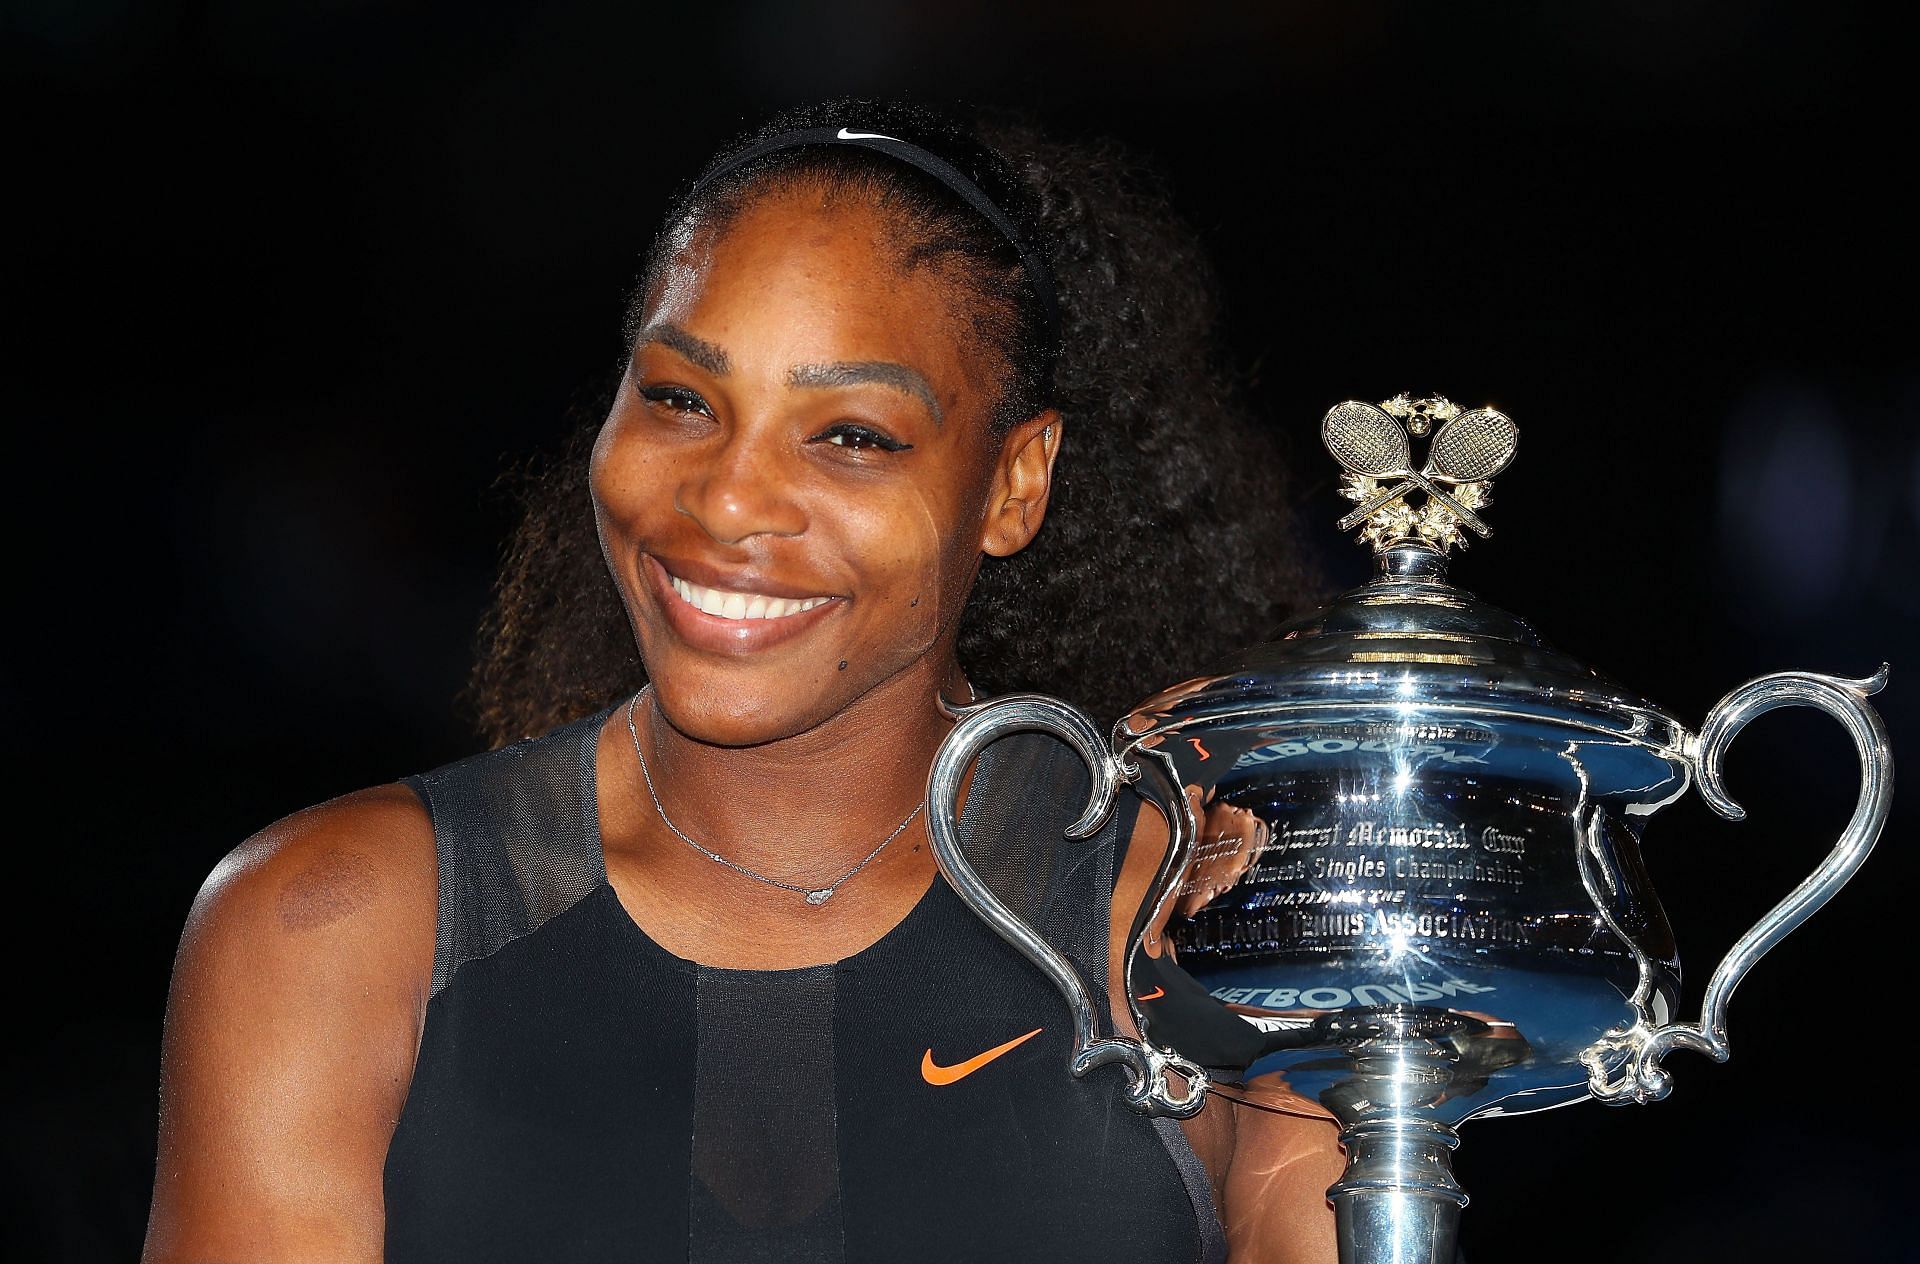 Serena Williams poses with the 2017 Australian Open trophy.